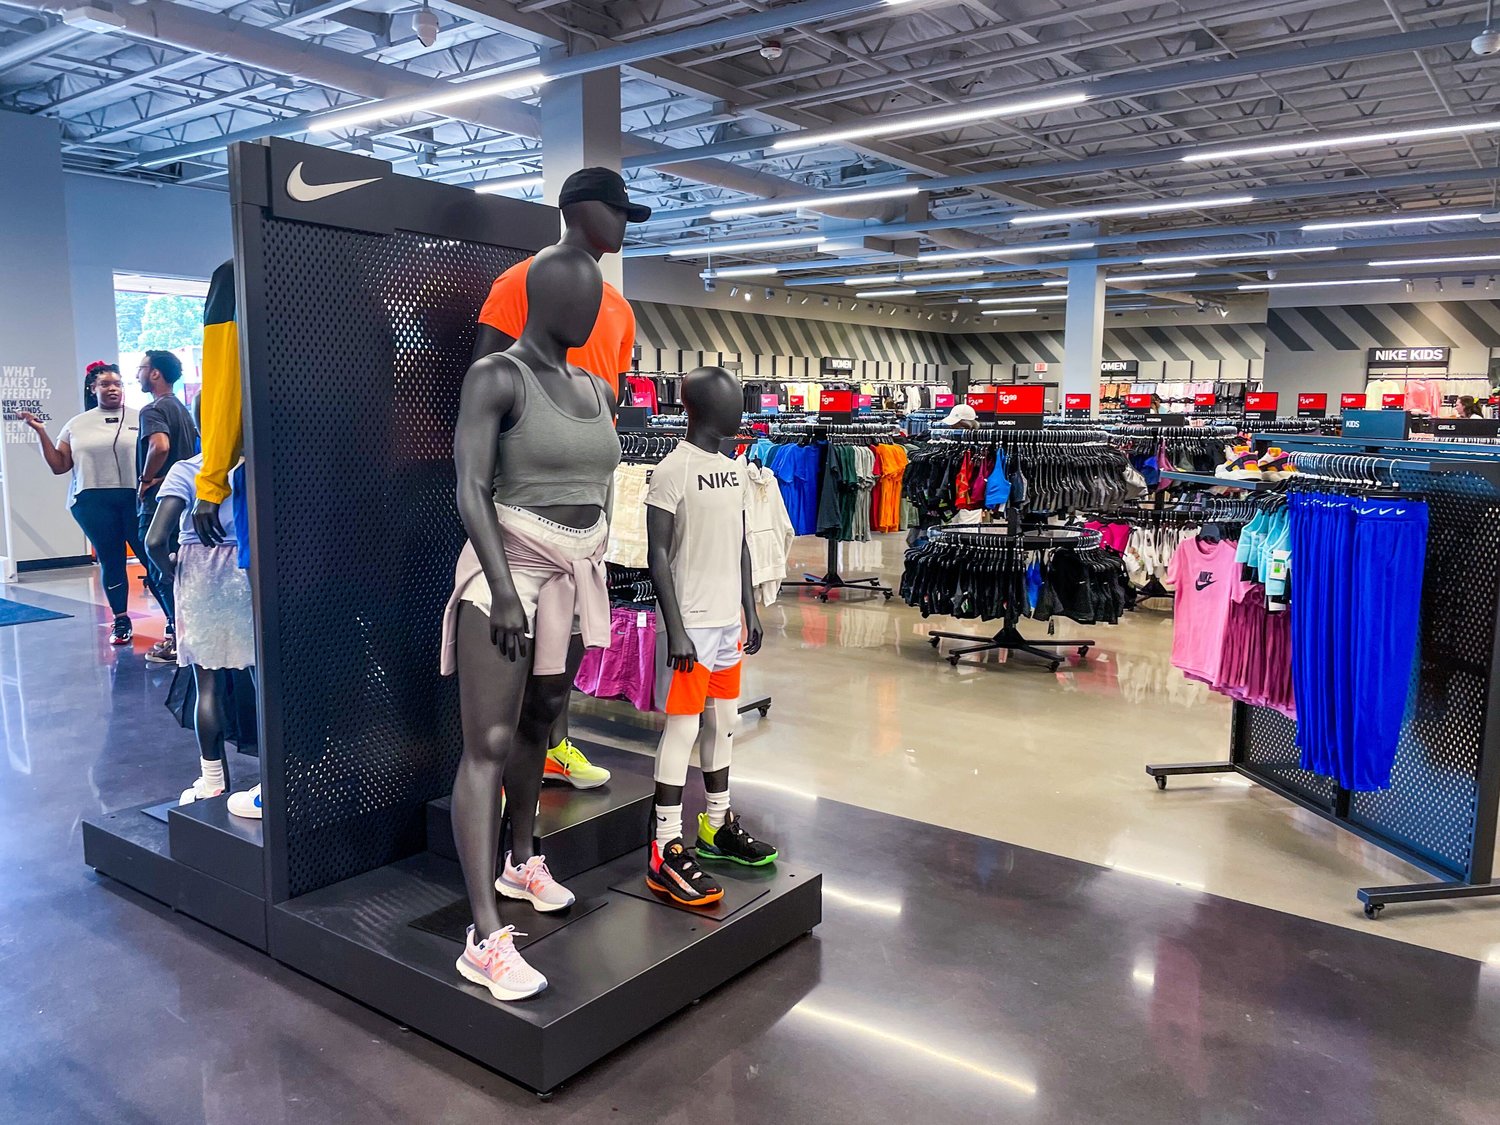 Clothing stretches wall to wall at the new Nike Clearance Store that opened Thursday in Centralia.